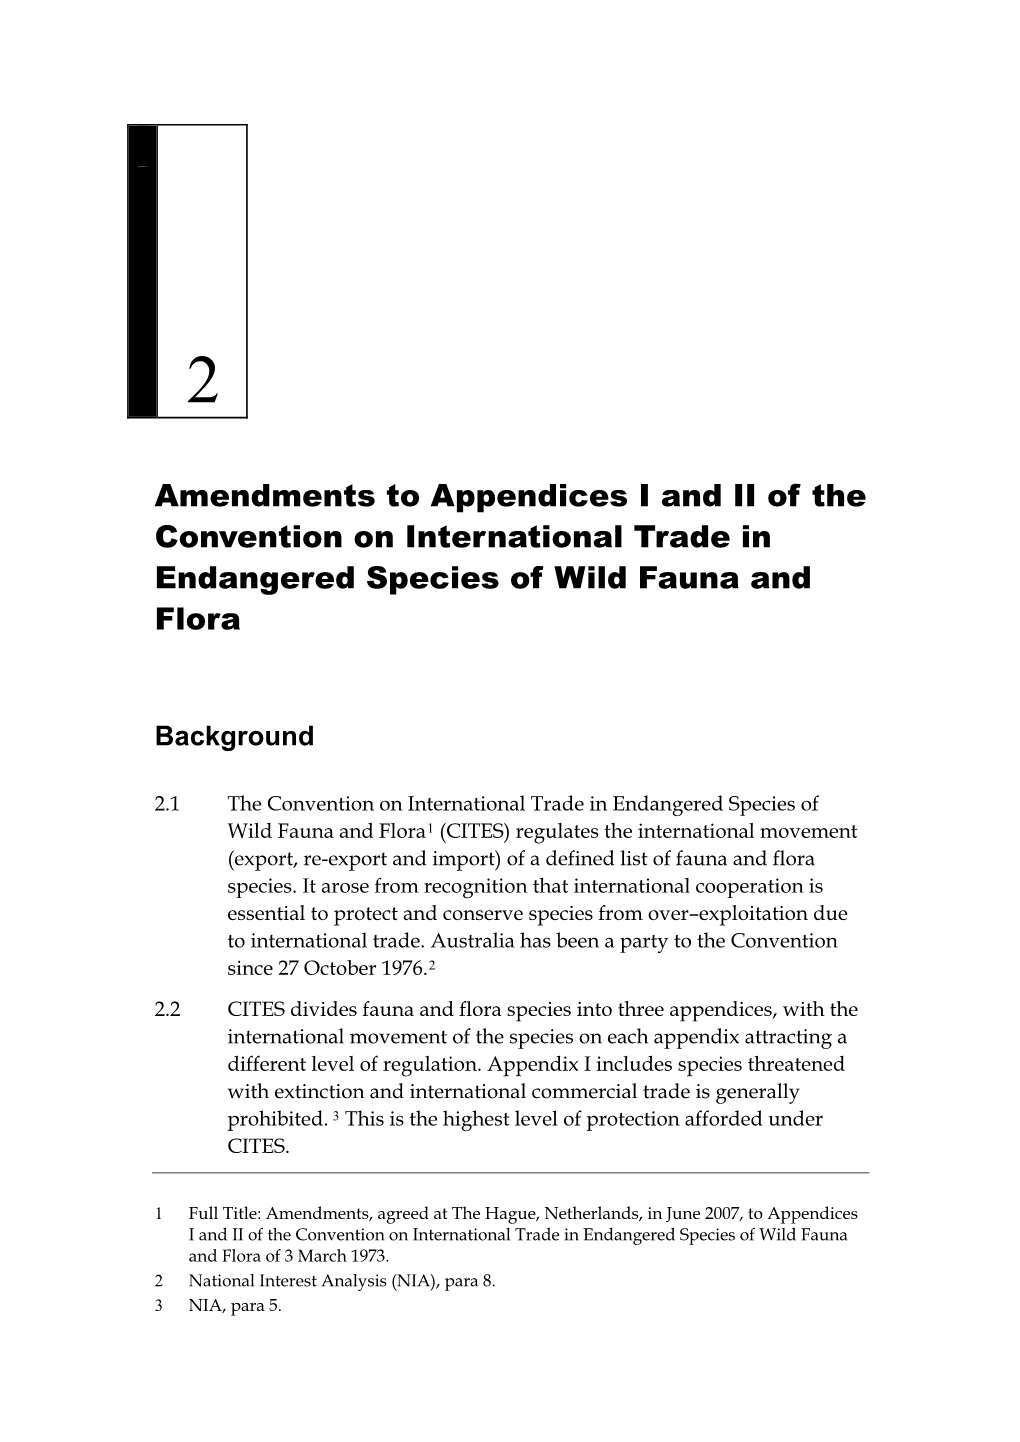 Chapter 2: Amendments to Appendices I and II of the Convention on International Trade in Endangered Species of Wild Fauna and Fl